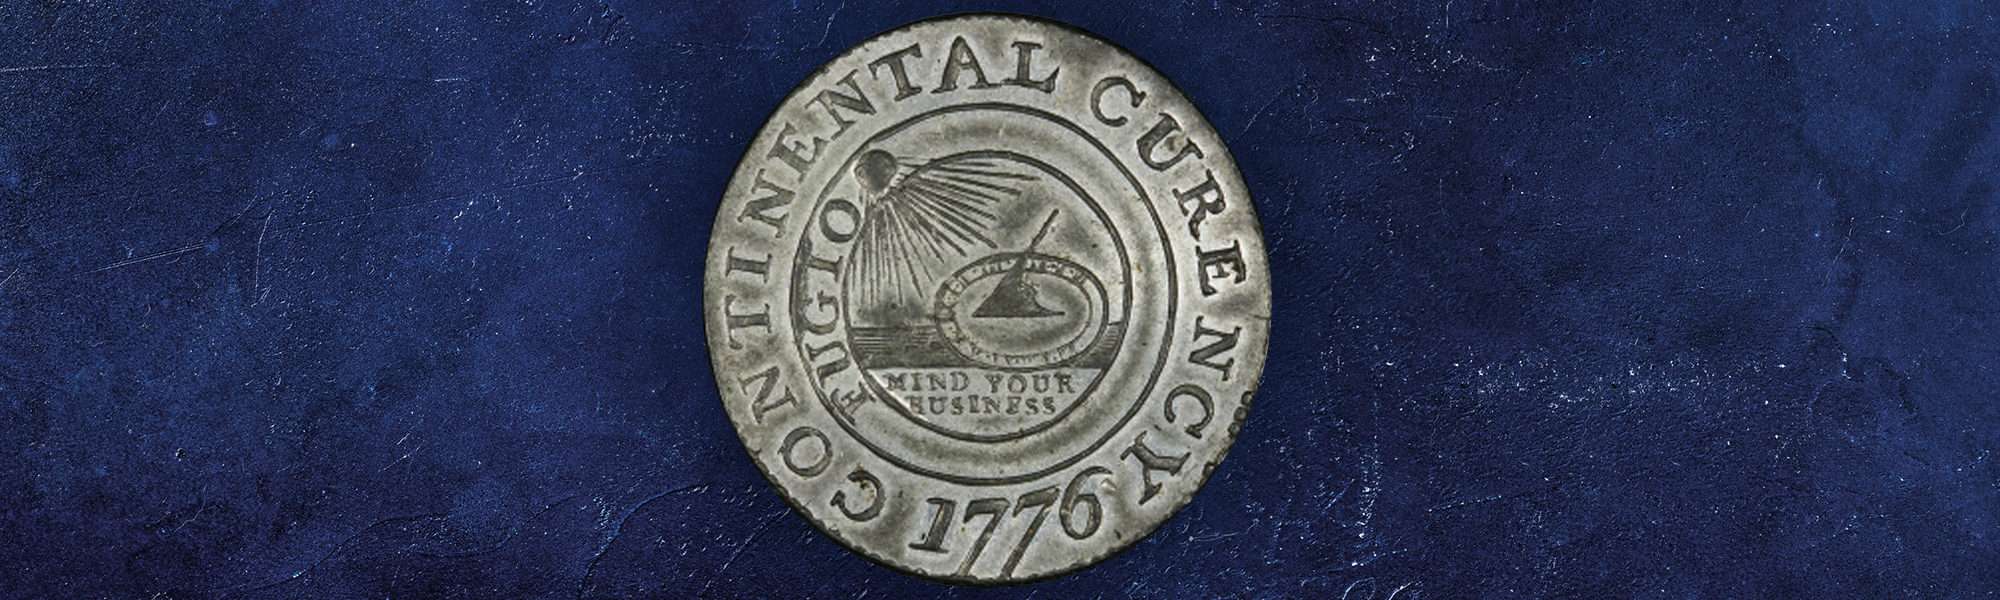 Everything You Need To Know About The 1776 Continental Dollar